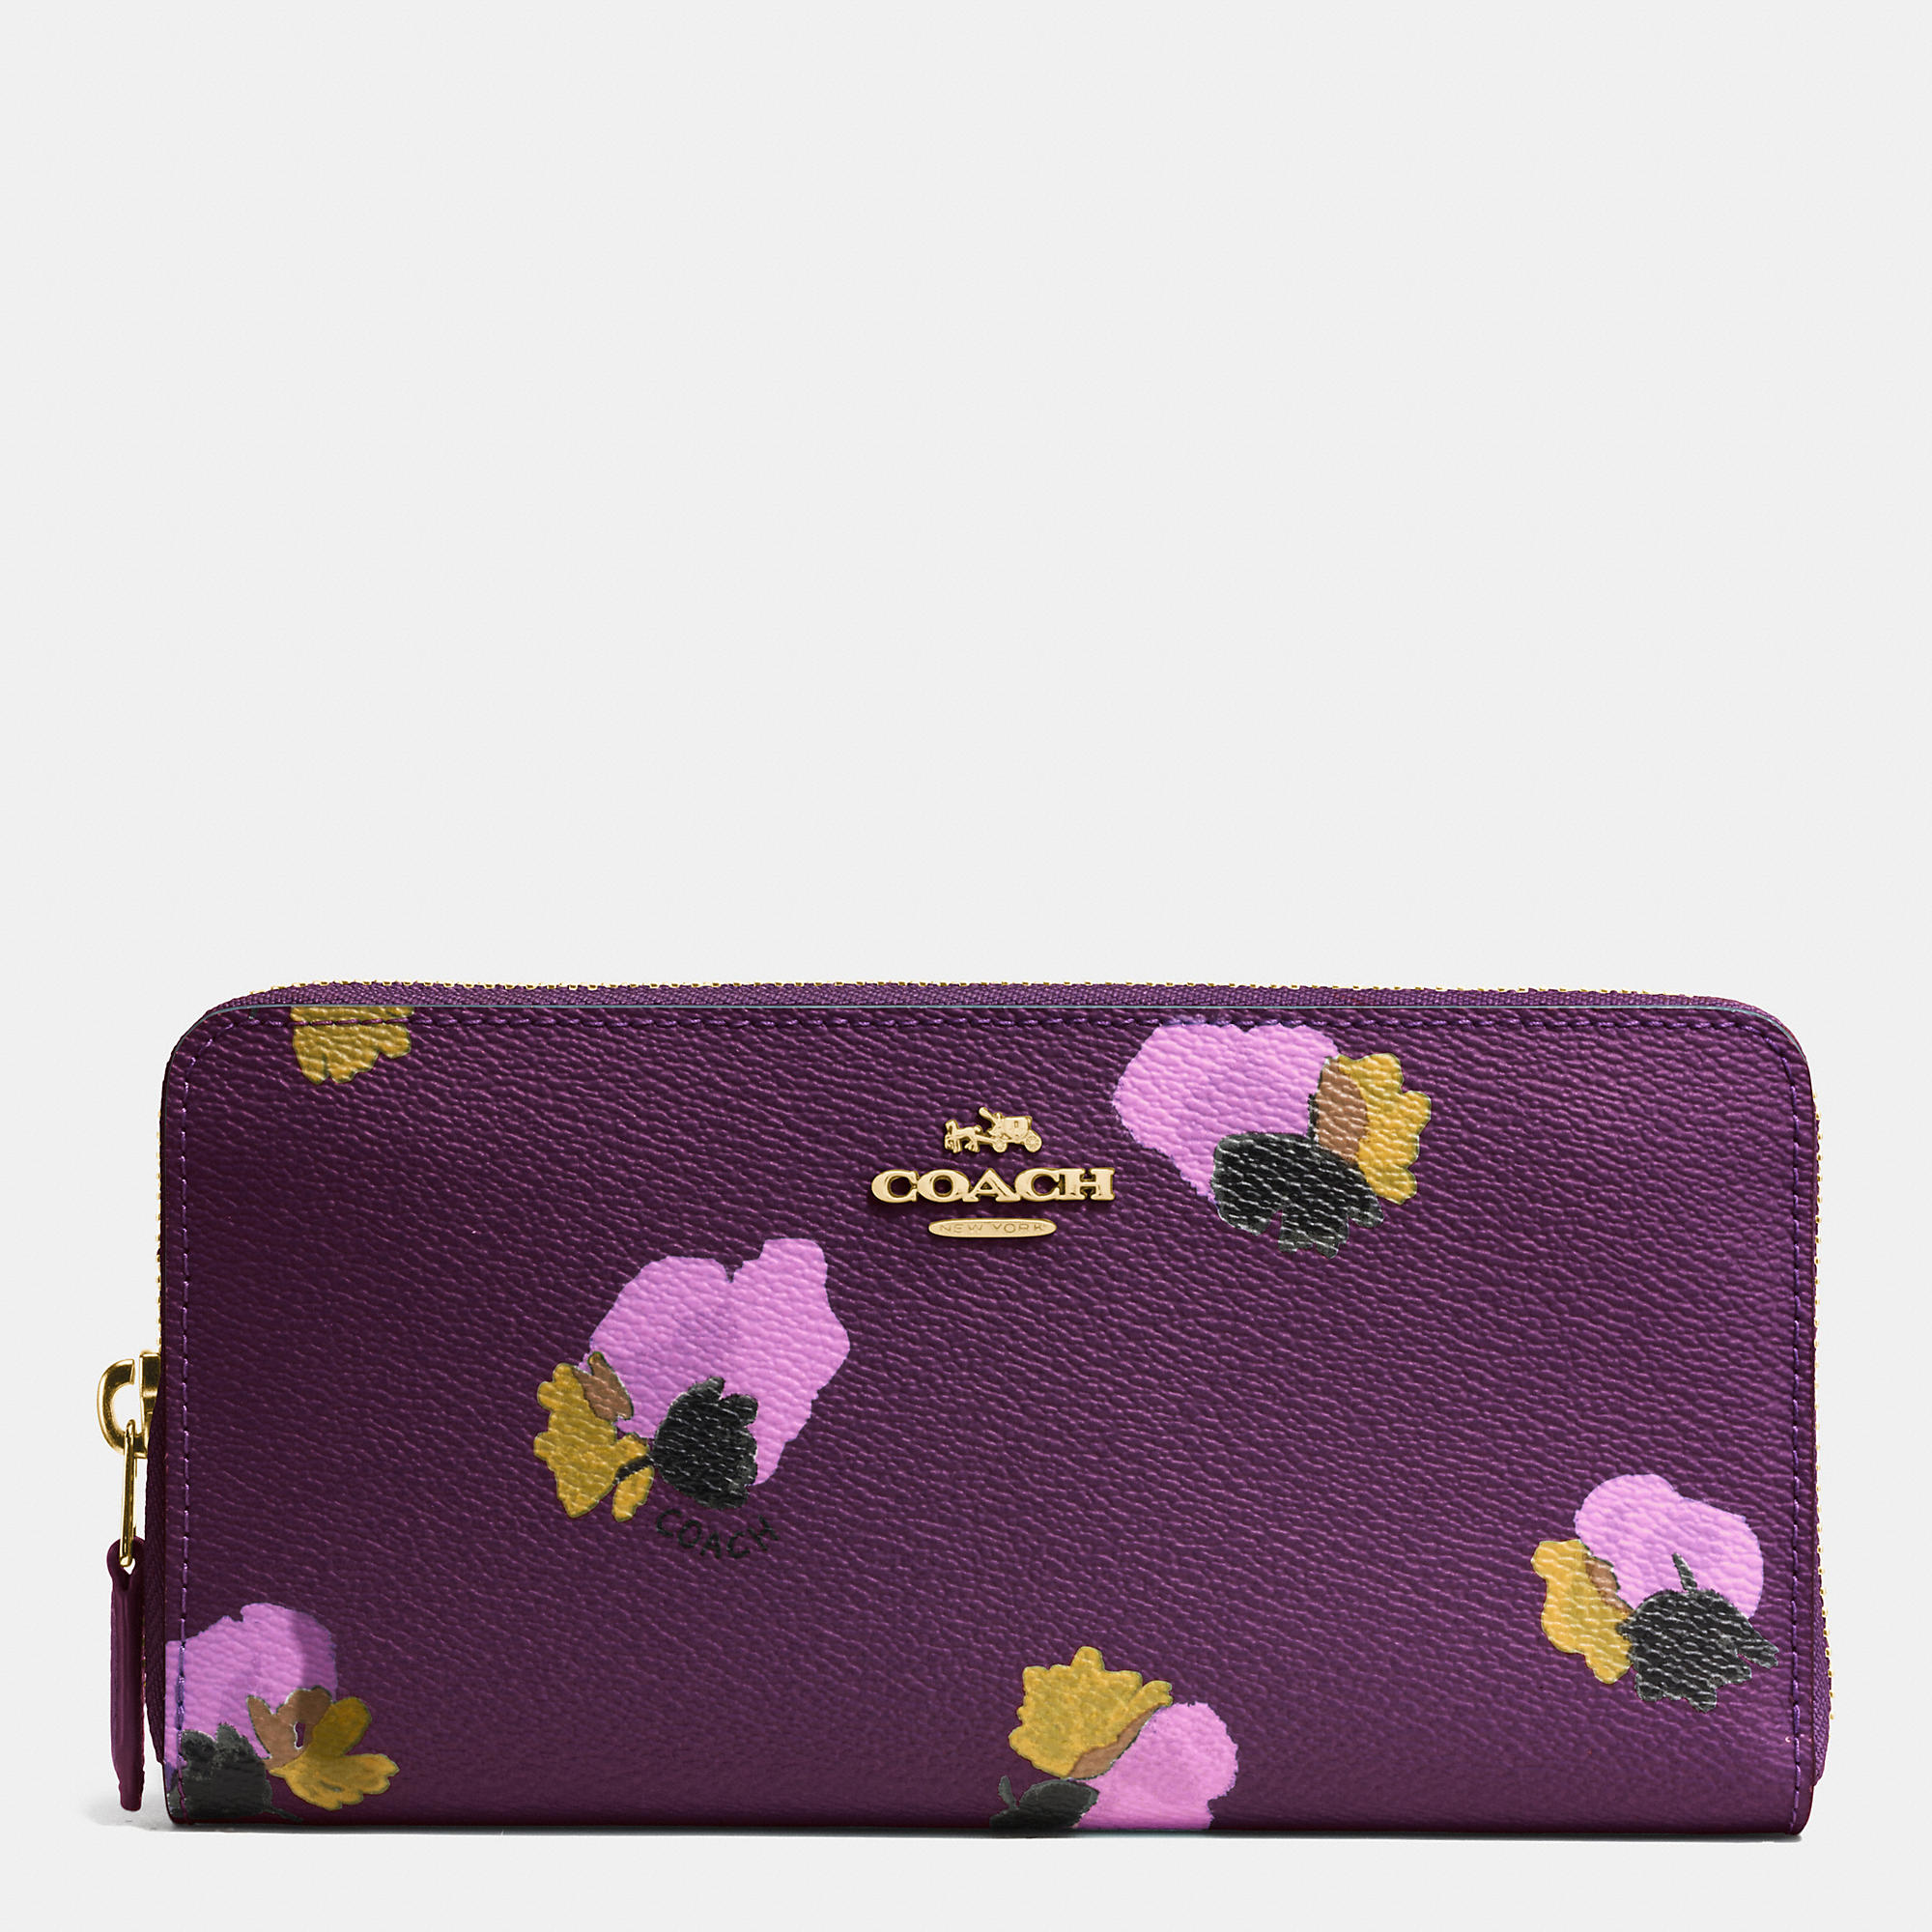 Lyst - Coach Accordion Zip Wallet In Floral Print Coated Canvas in Purple